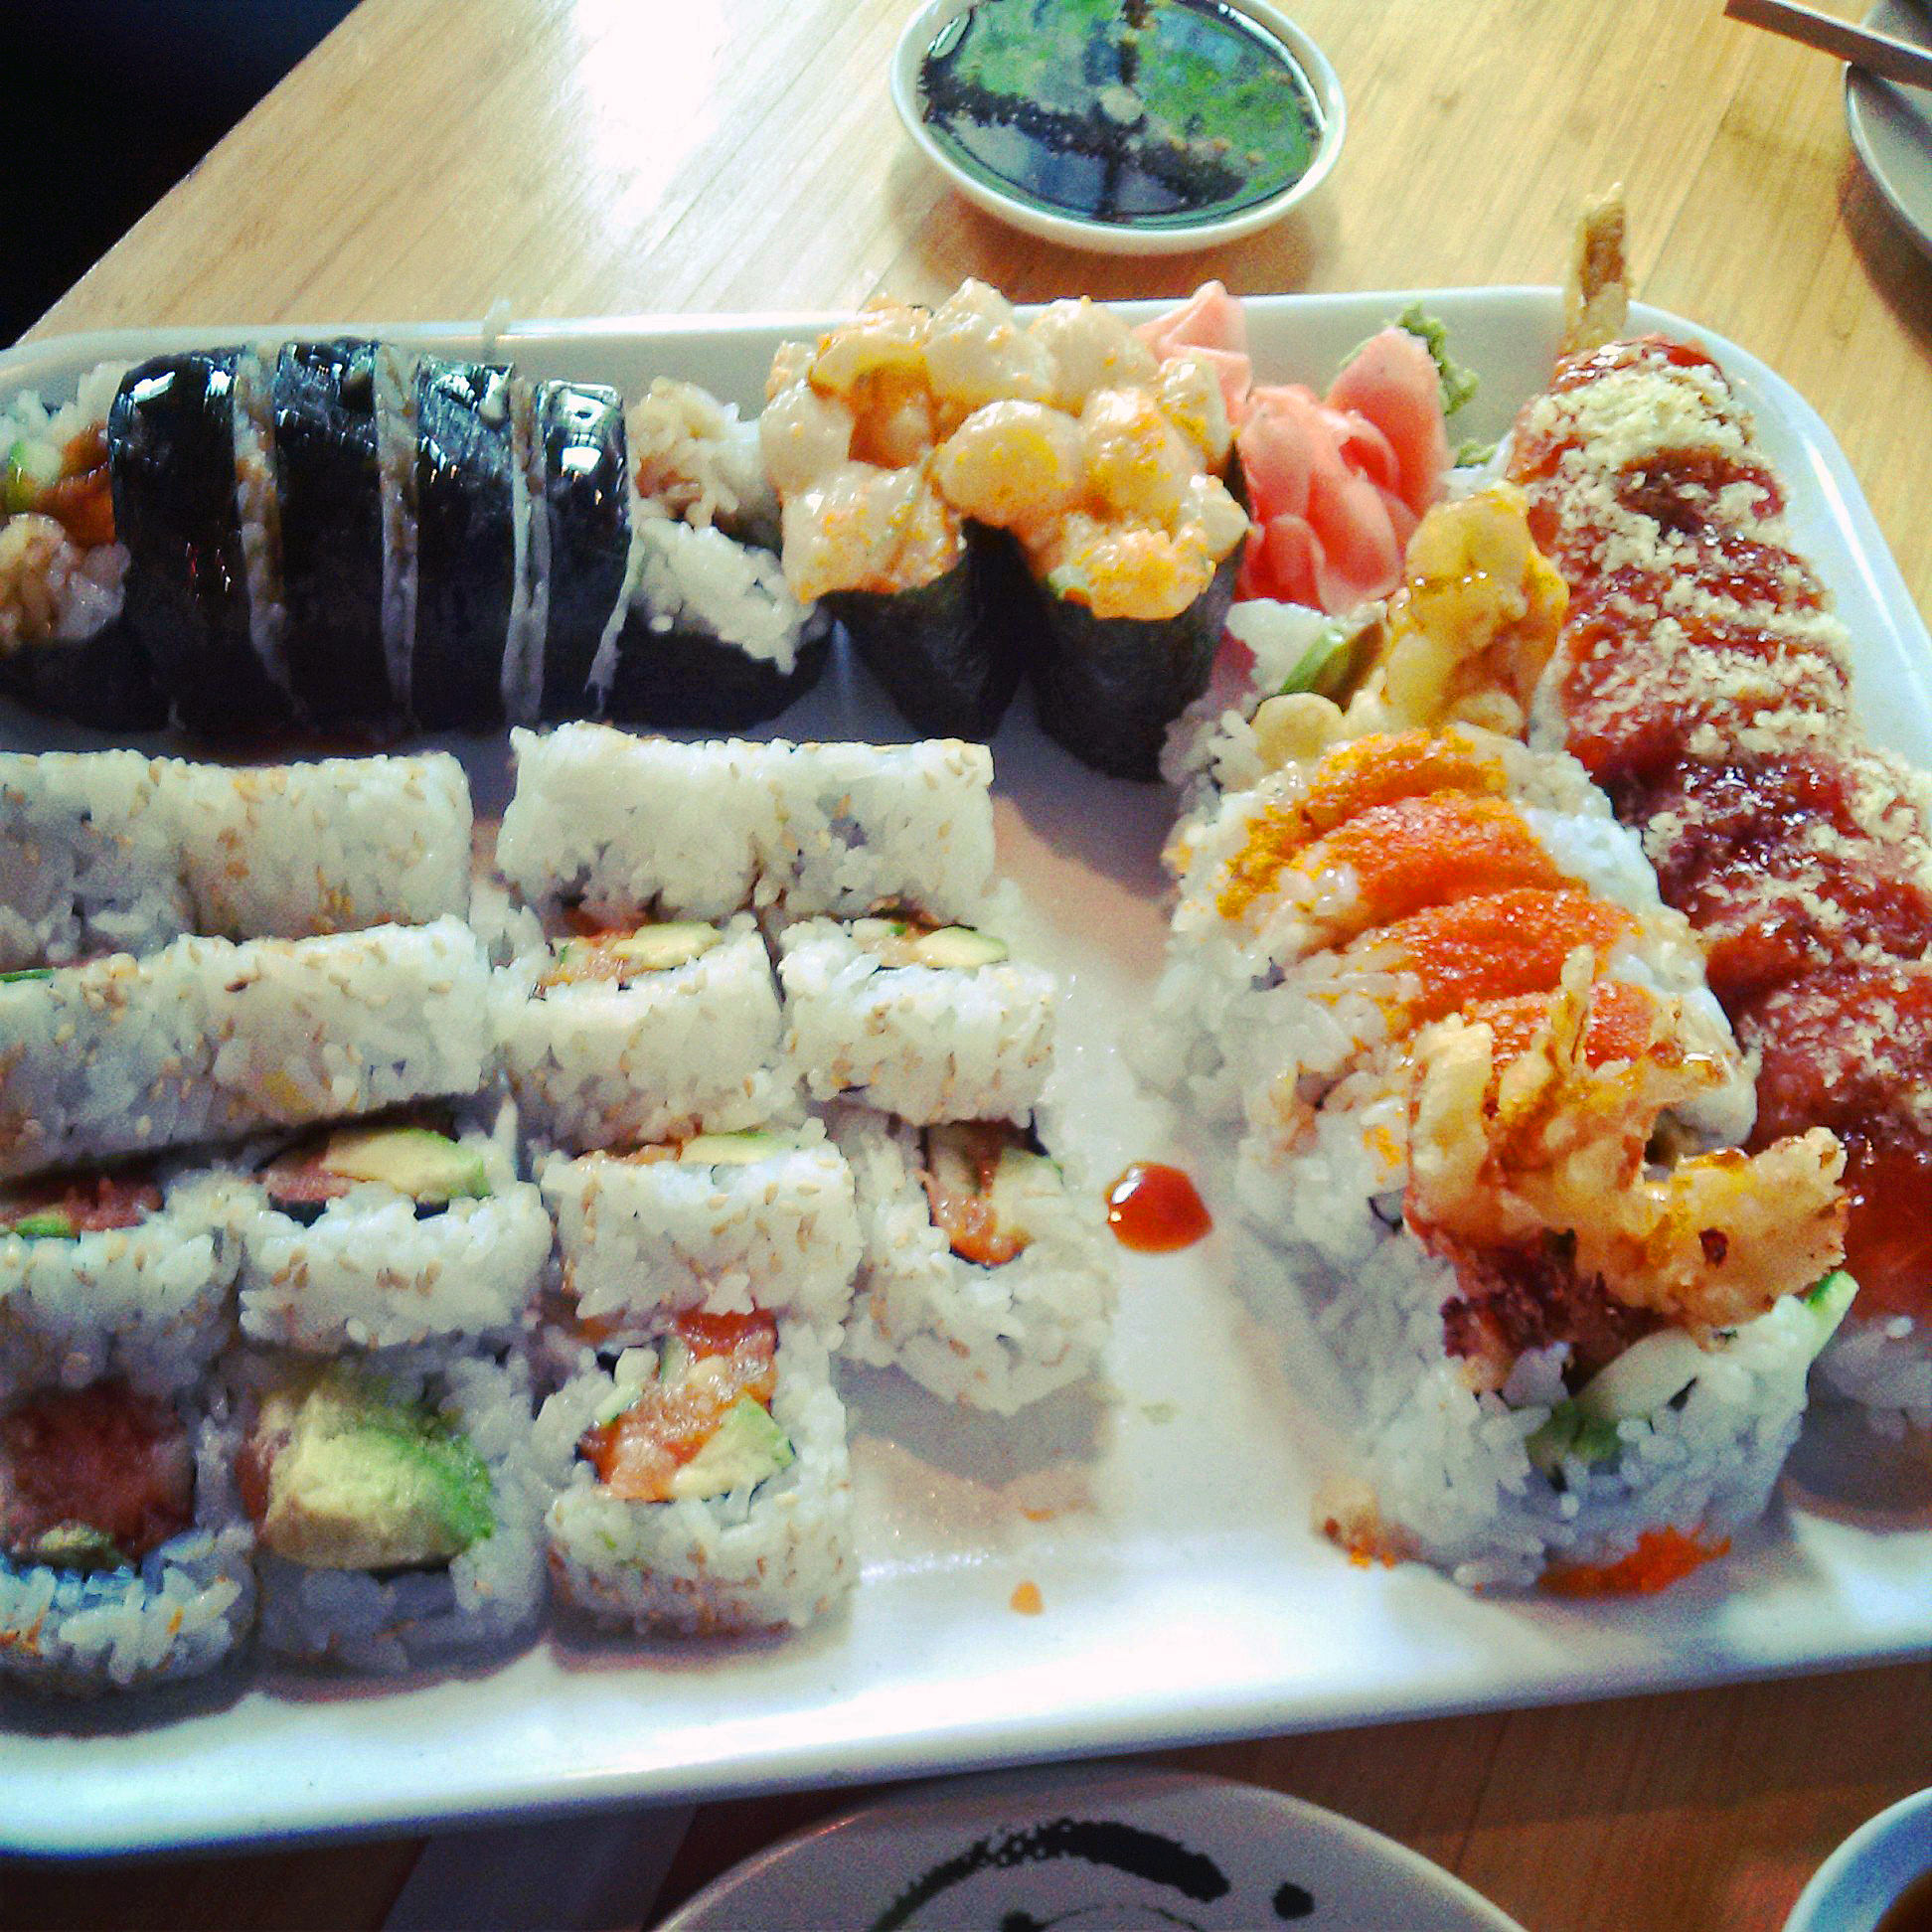 More Sushi Please